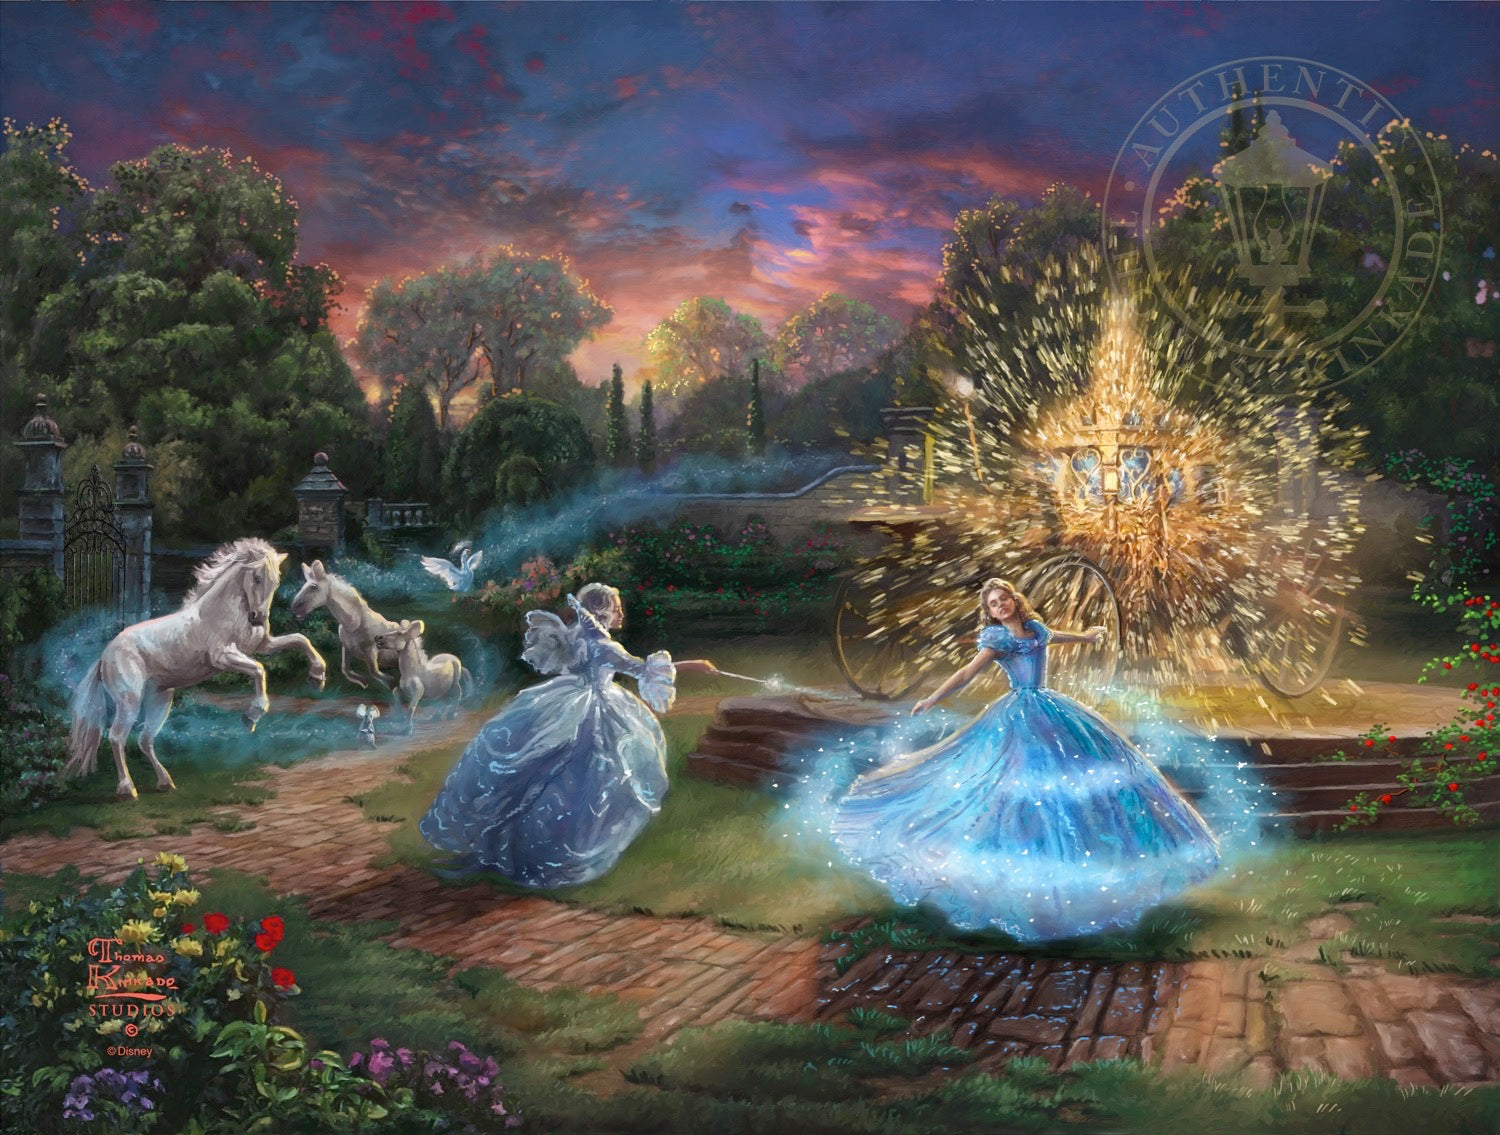 Wishes Granted features Cinderella's enchanted transformation with the help of her Fairy Godmother. Unframed